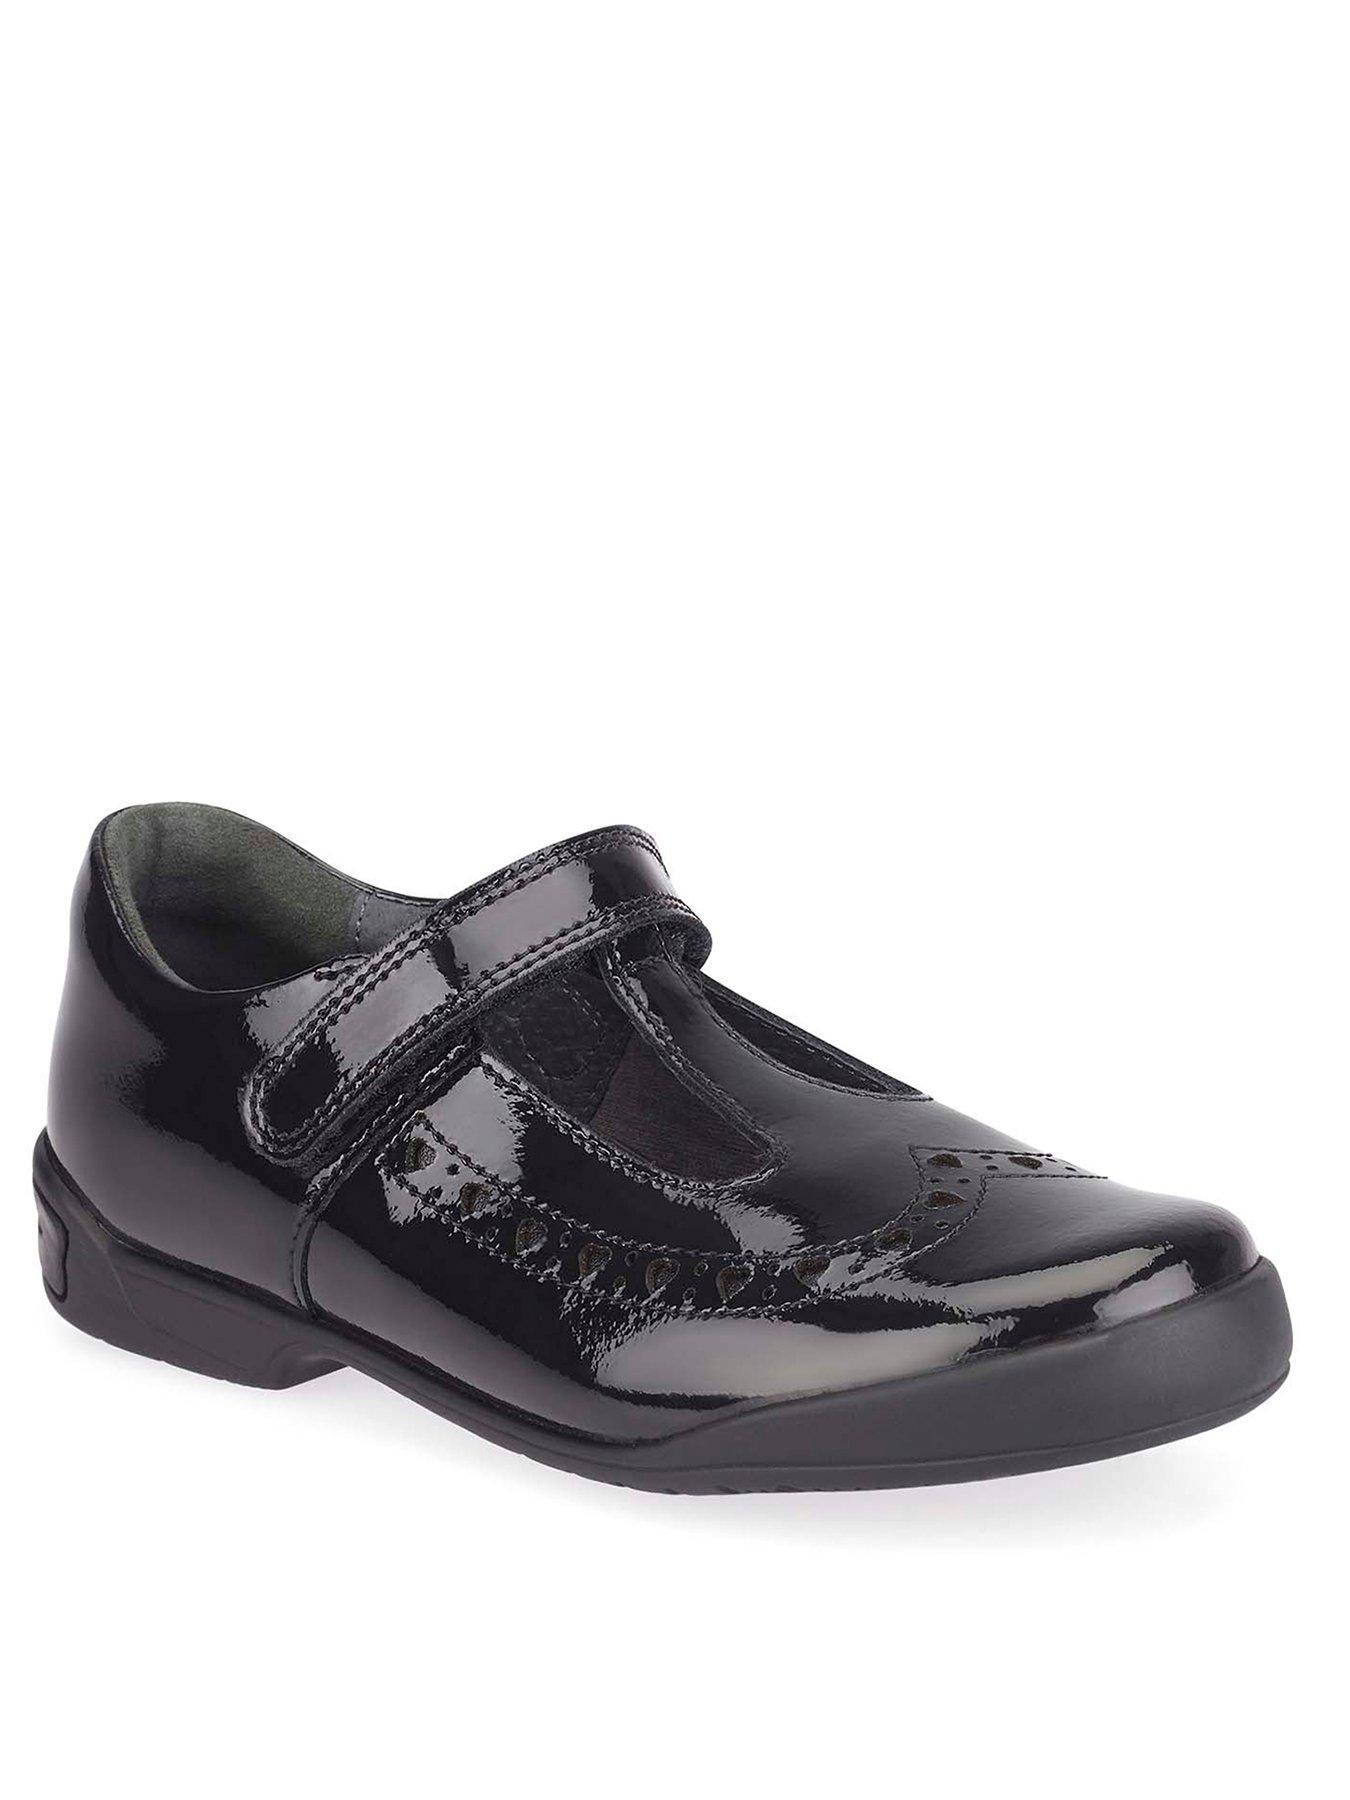 wide fitting shoes for elderly ladies